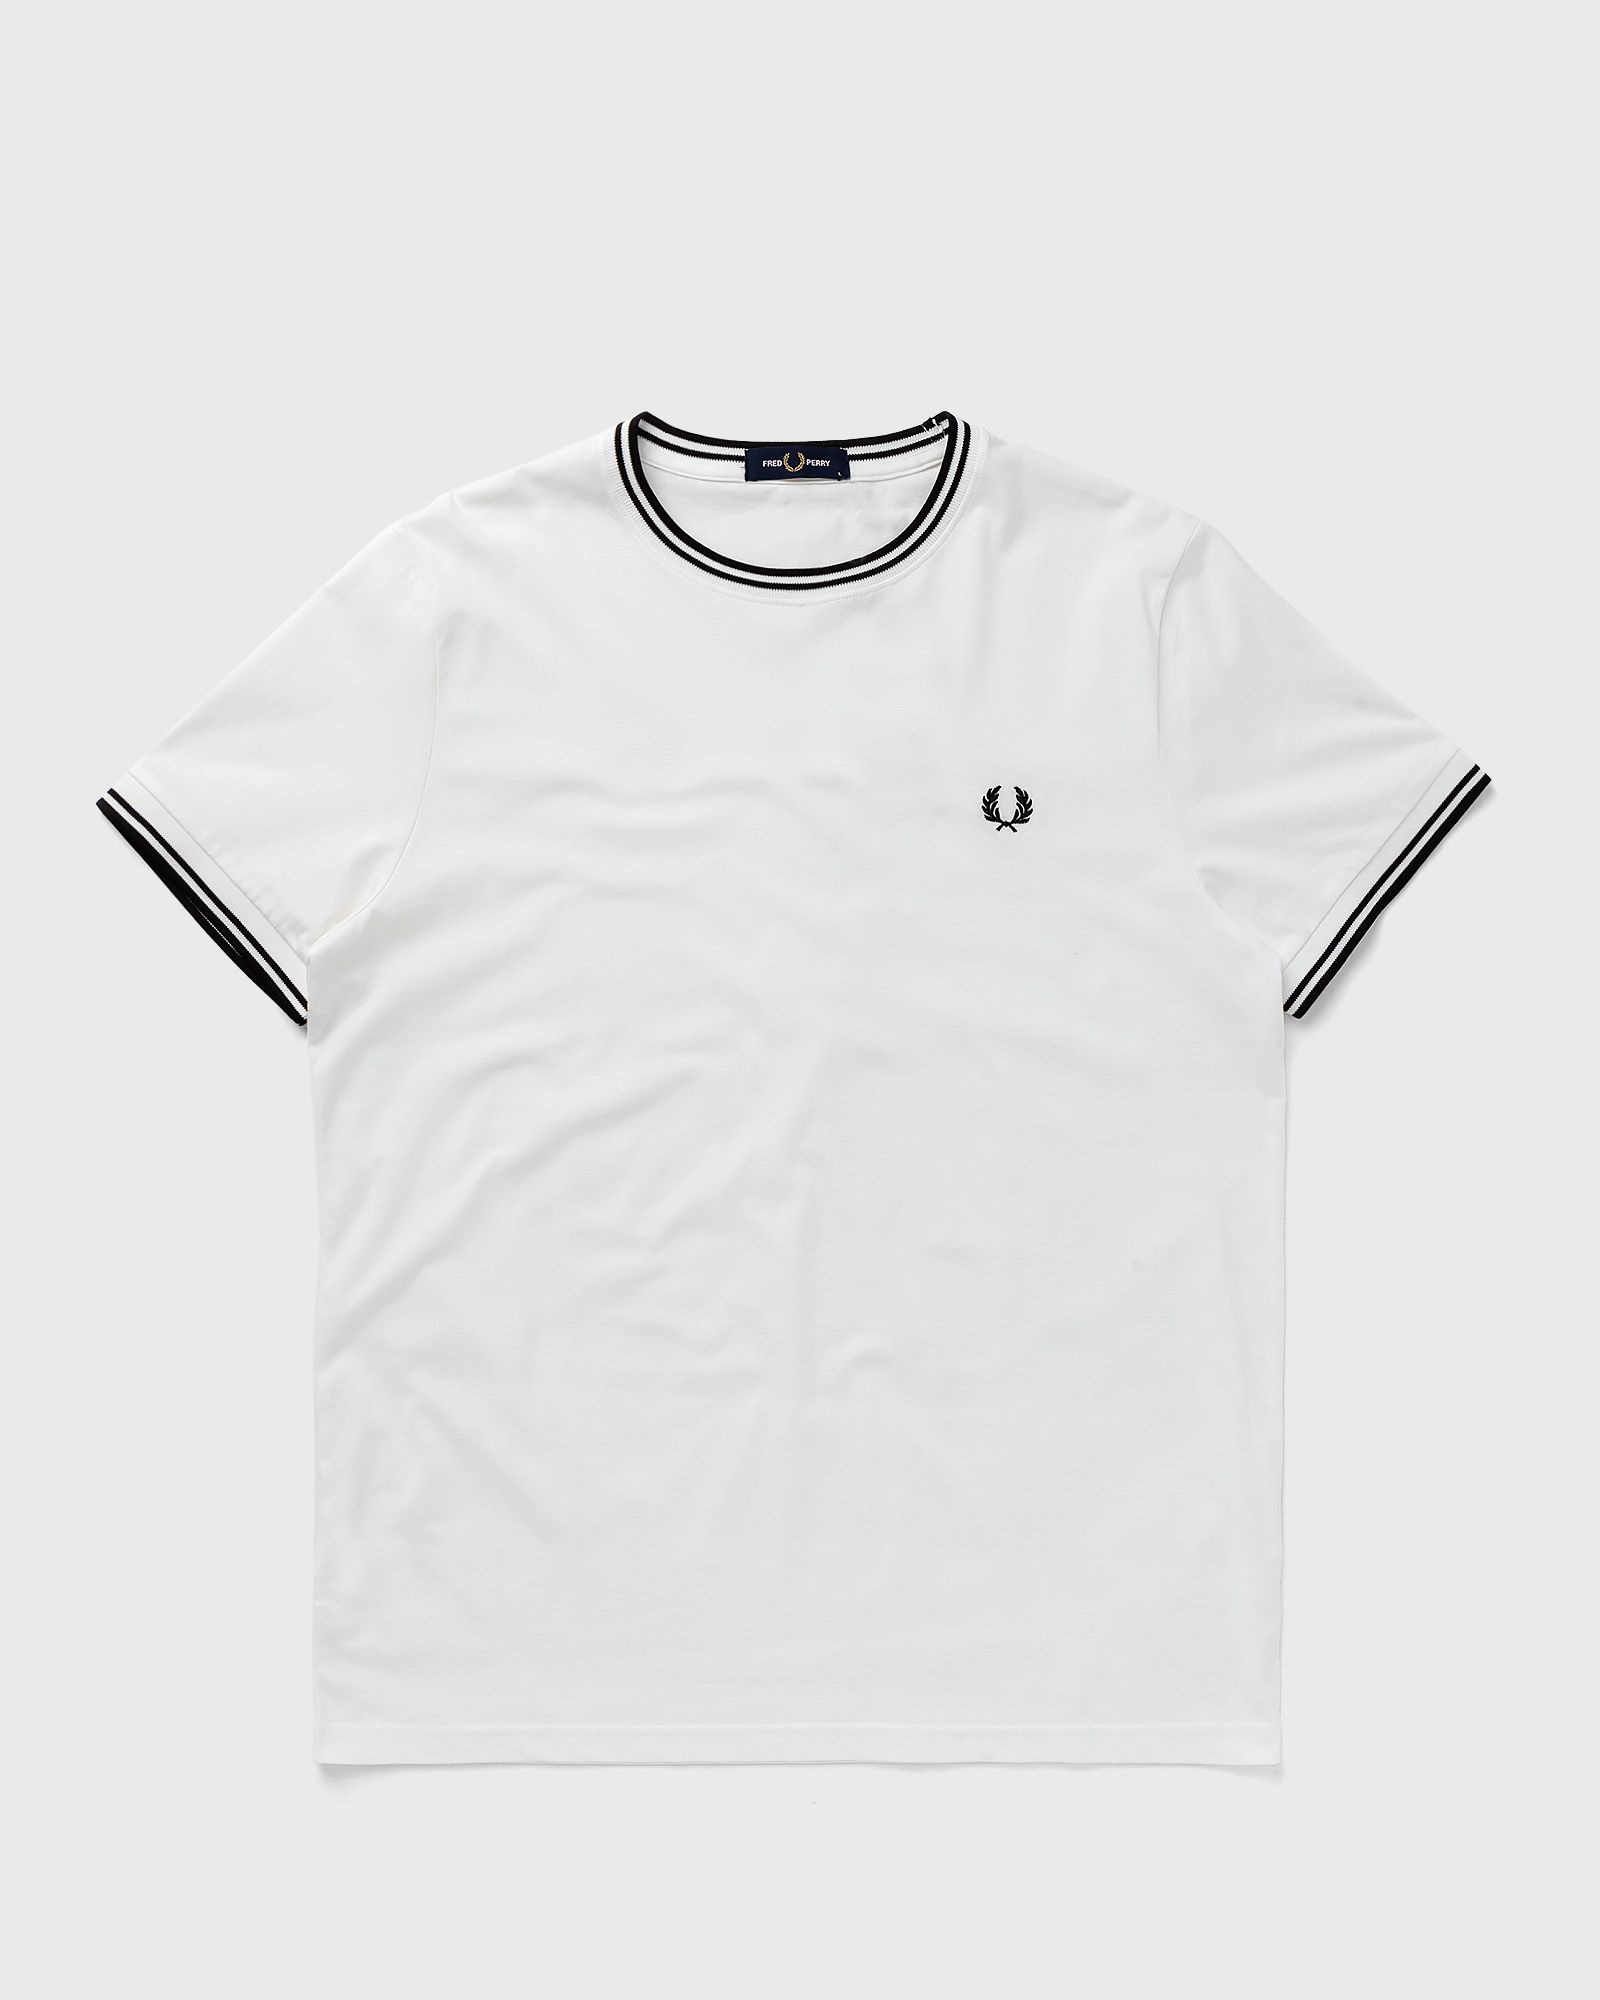 Fred Perry TWIN TIPPED T-SHIRT men Shortsleeves white in Größe:S von Fred Perry